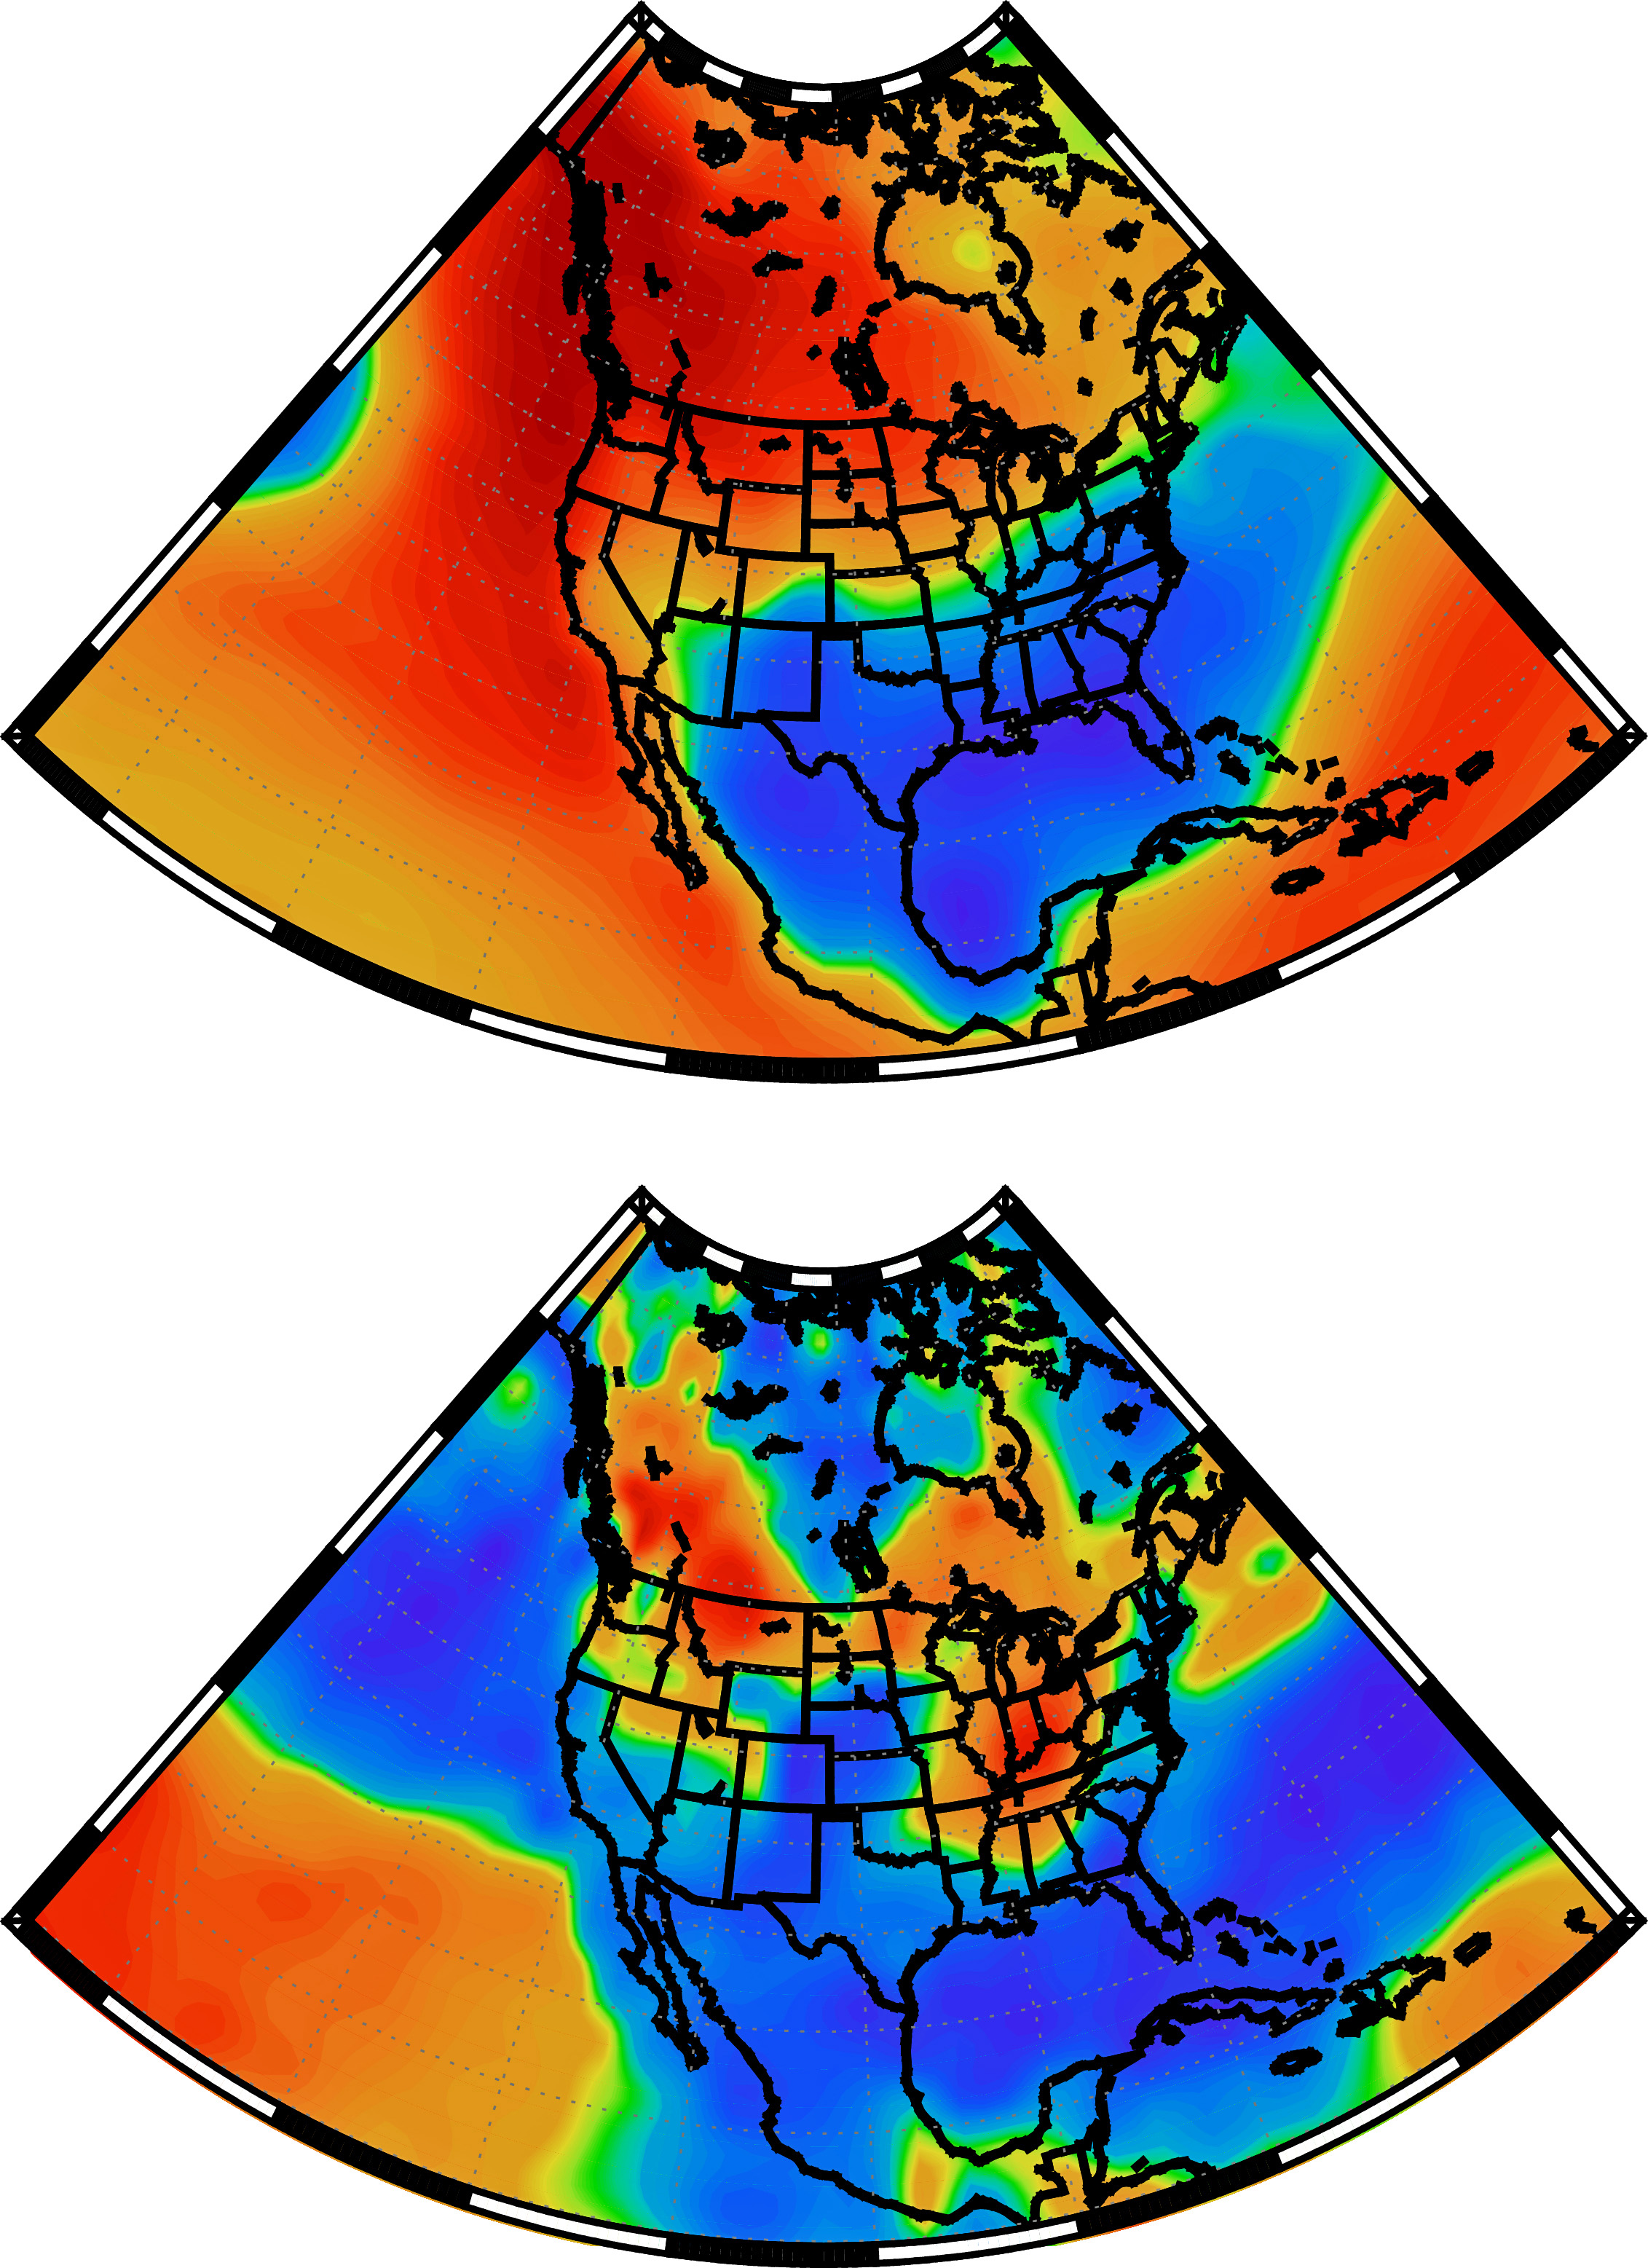 Warm U.S. West, Cold East: A 4,000-Year Pattern | University of ...